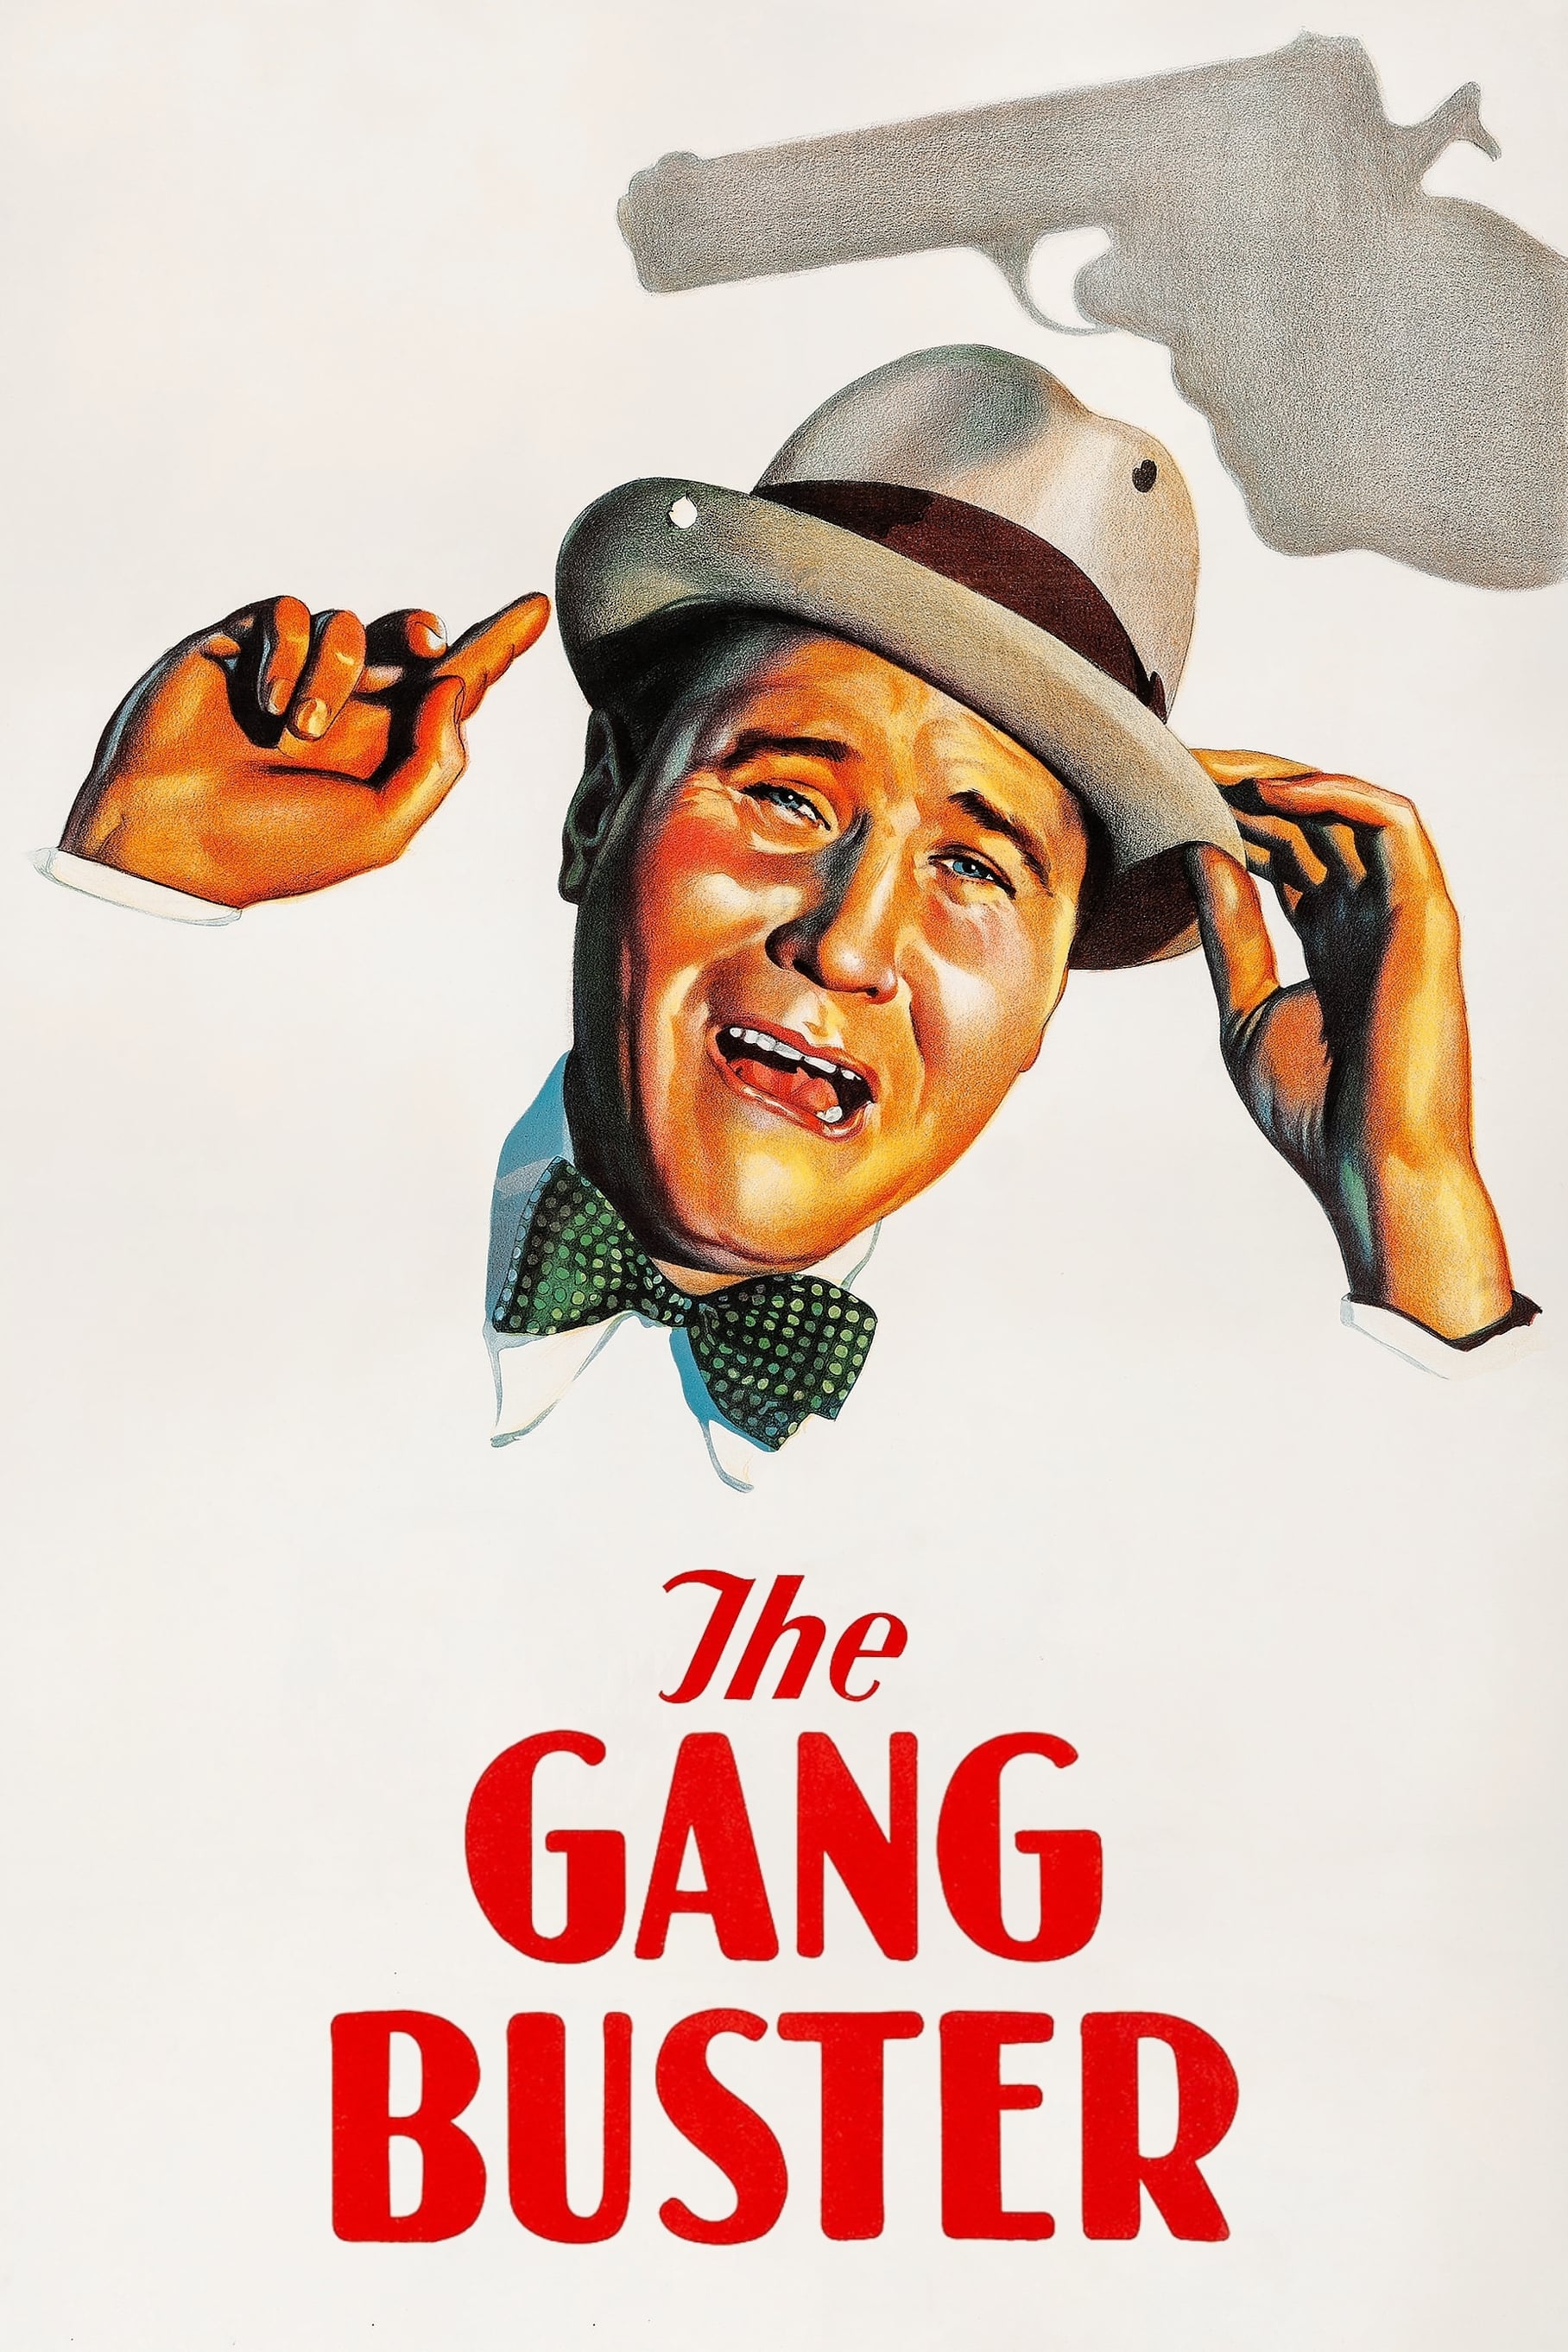 The Gang Buster